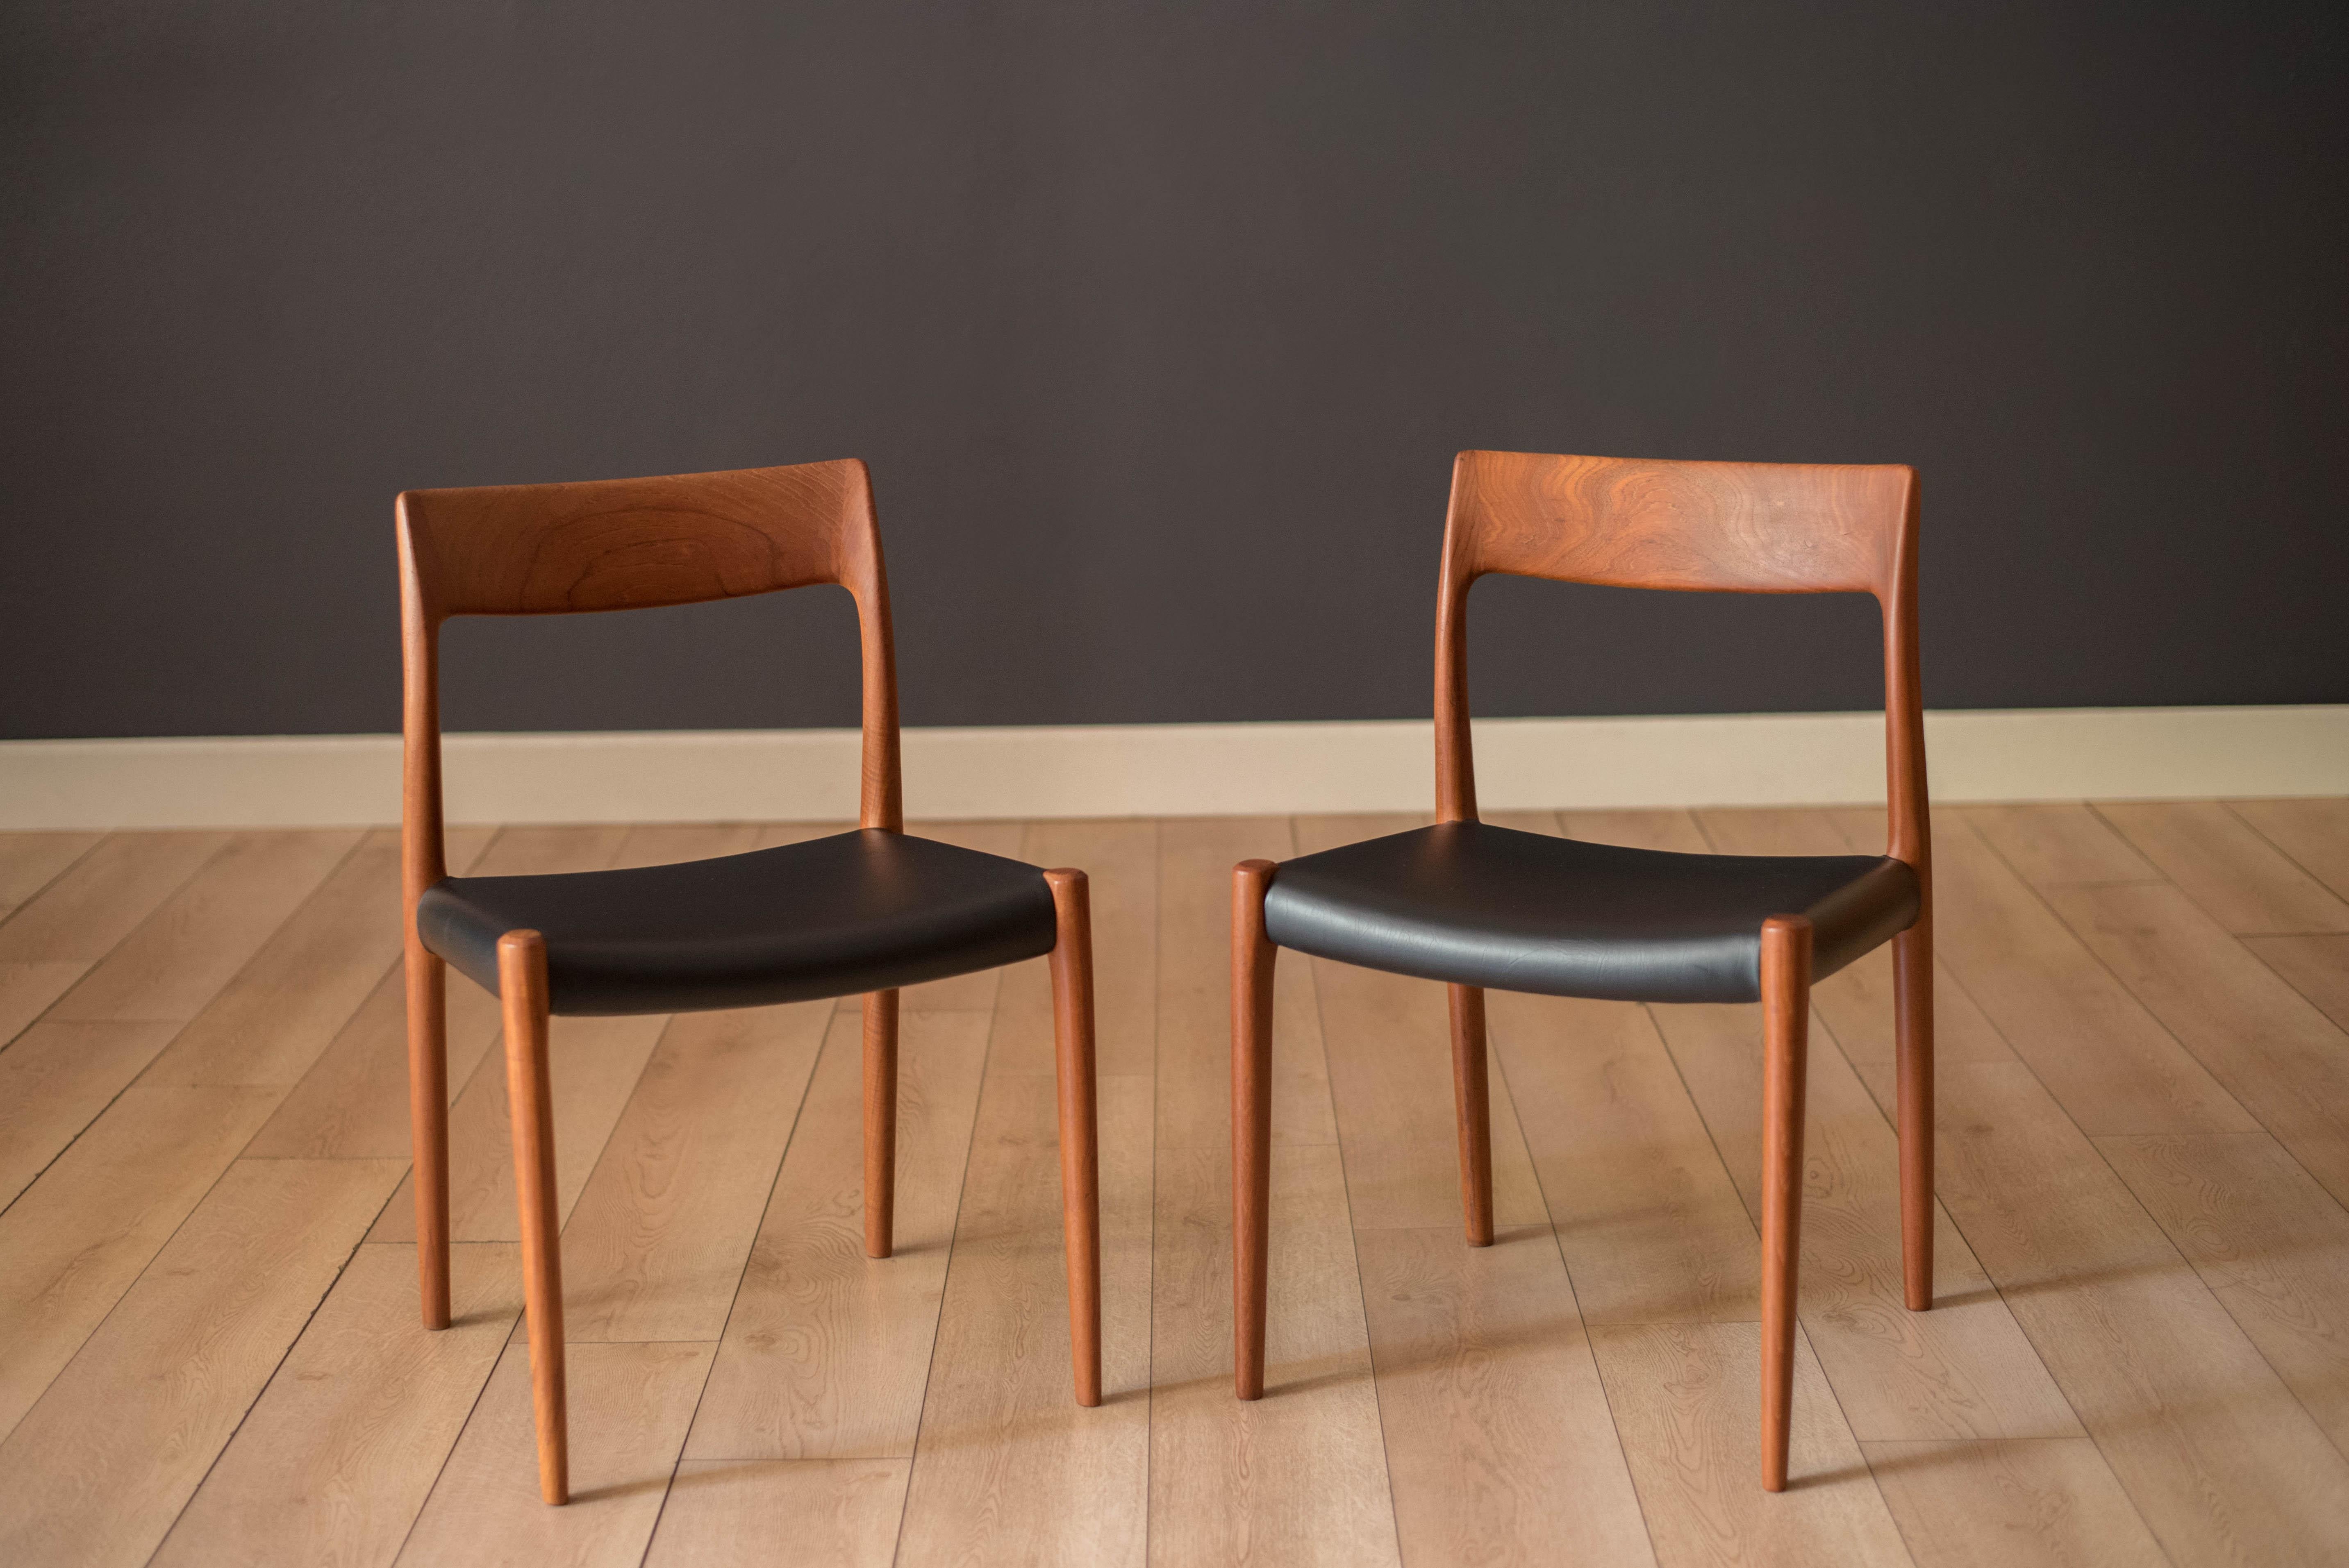 Pair of Mid-Century Modern dining chairs designed by Niels Otto Møller for J.L. Møller Møbelfabrik, Denmark. Features sculpted teak frames and seats have been professionally reupholstered in black vinyl. Price includes the set of two.